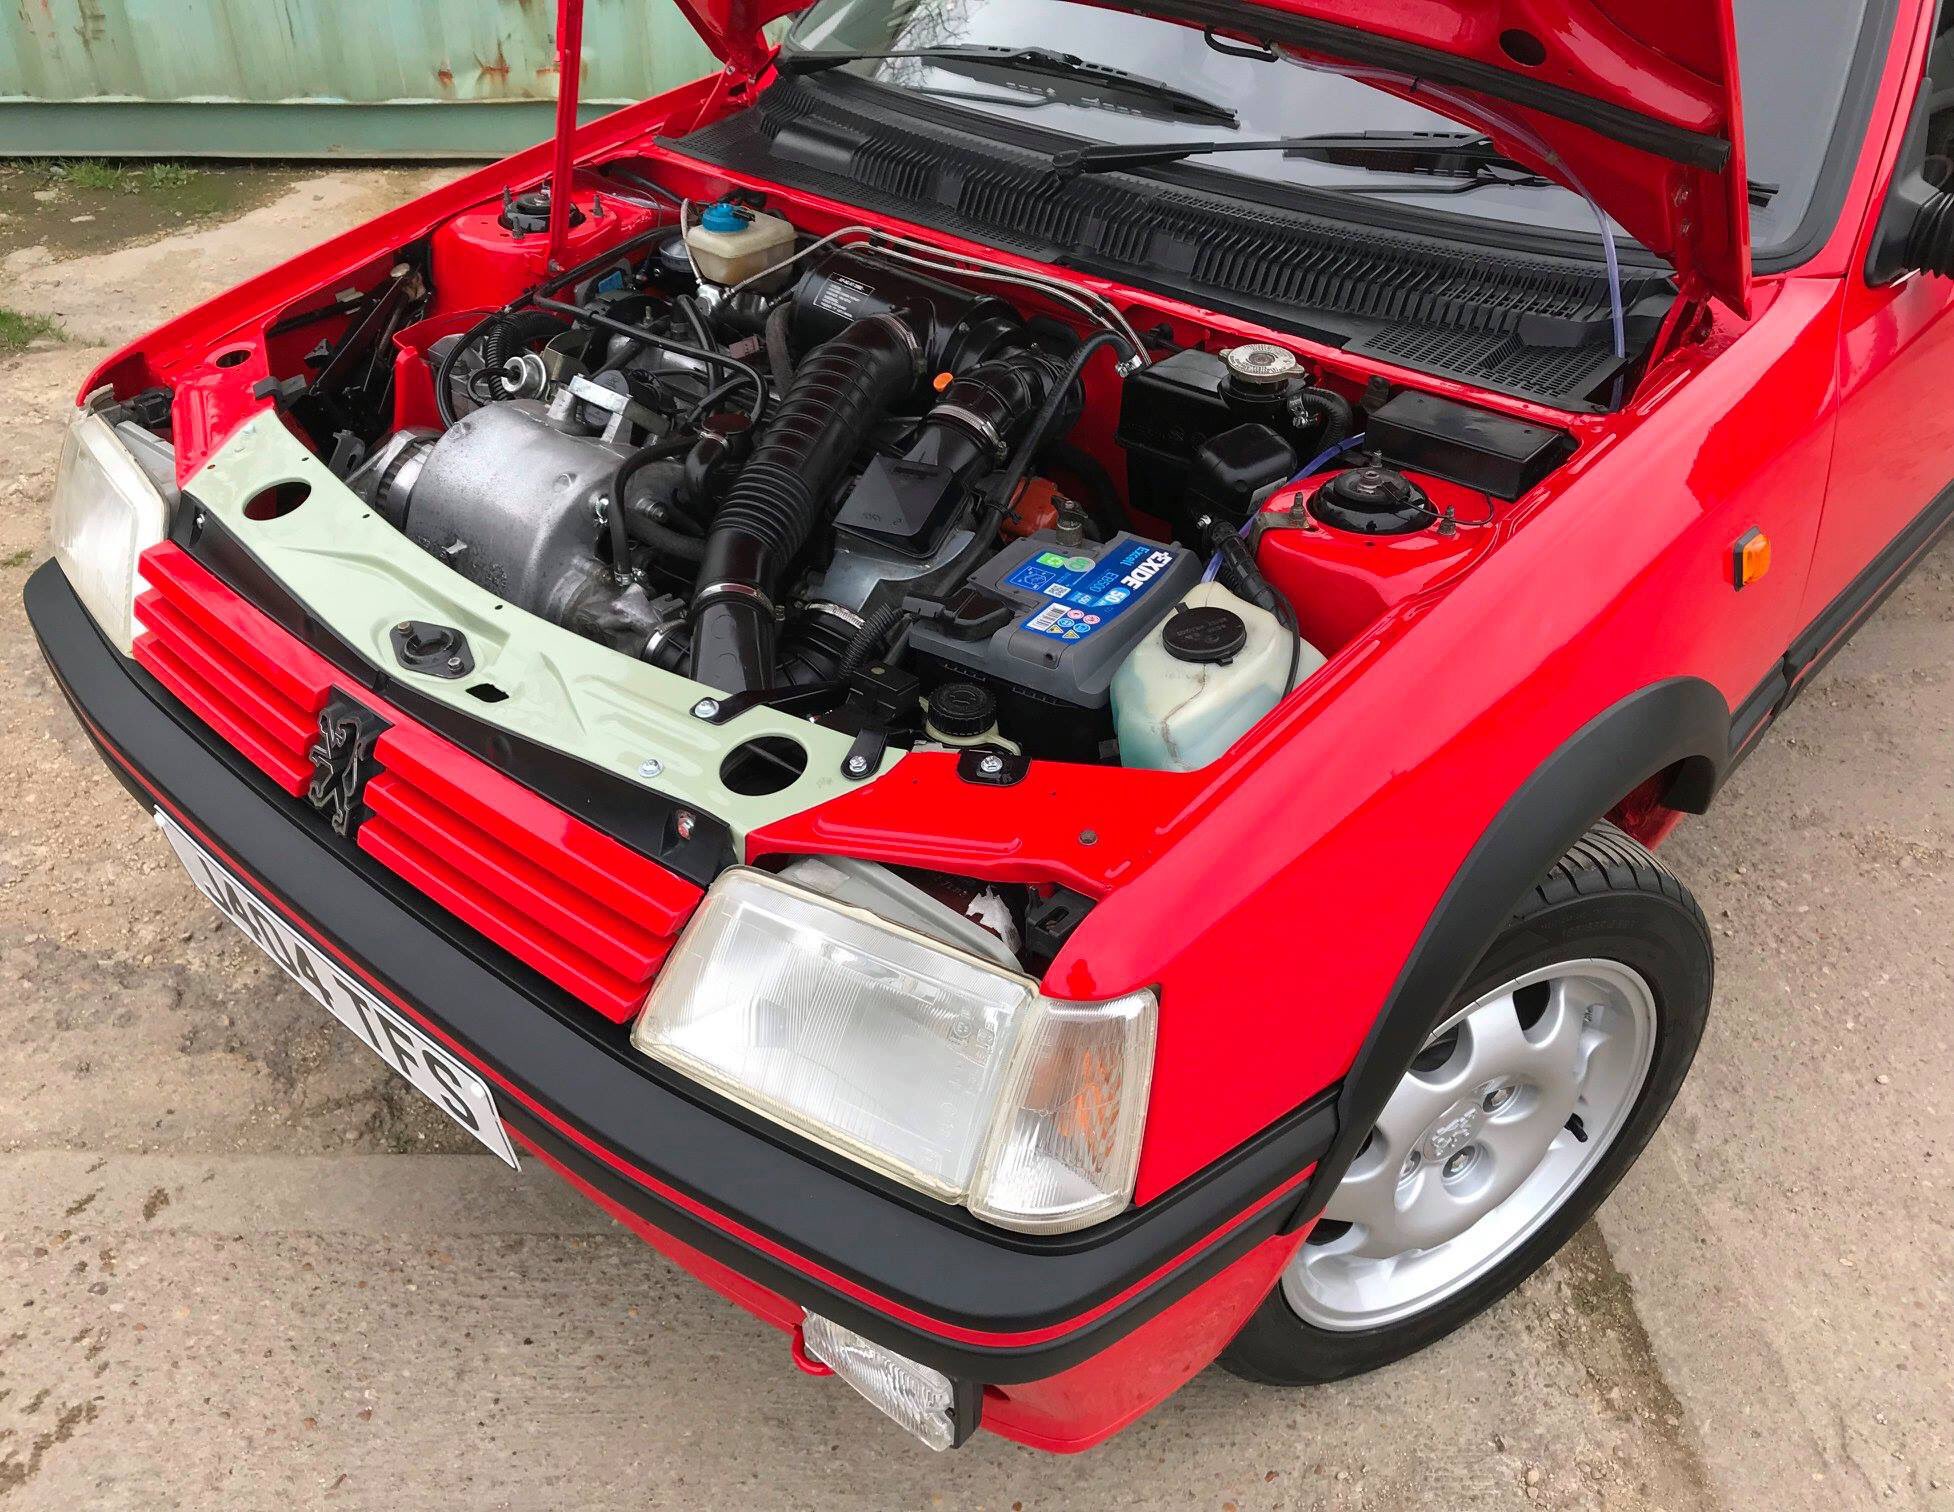 verrader Tact begaan PUG1OFF on Twitter: "Mark's #Peugeot #205GTI was collected at the weekend  after a full exterior restoration along with general maintenance &amp;  servicing. https://t.co/Ae56xuUTT2 https://t.co/fLRXwTQBOw" / Twitter